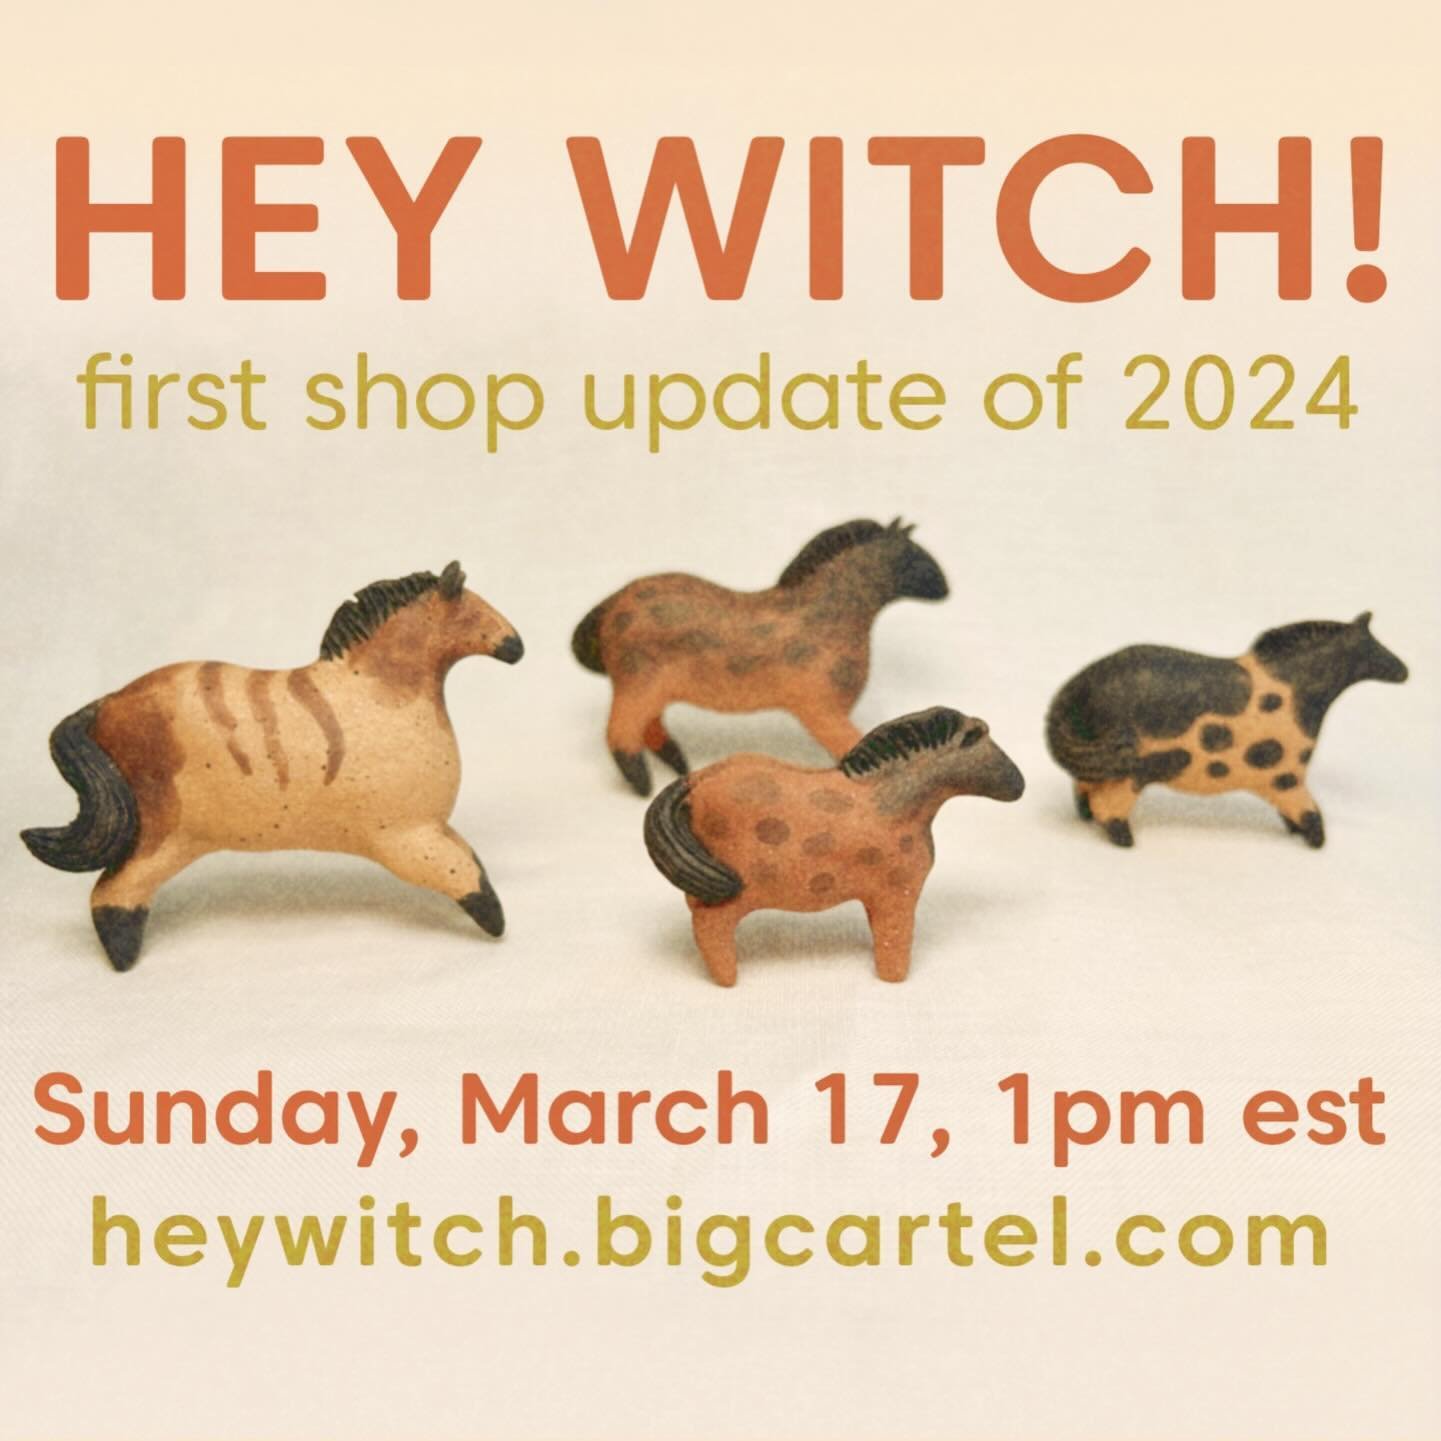 A wee reminder that my first shop update of 2024 is fast approaching! Everything goes live this Sunday, March 17th at 1pm est &mdash; see 🔗 in my profile or go to heywitch.bigcartel.com for a preview of all the creatures &amp; vessels for sale this 